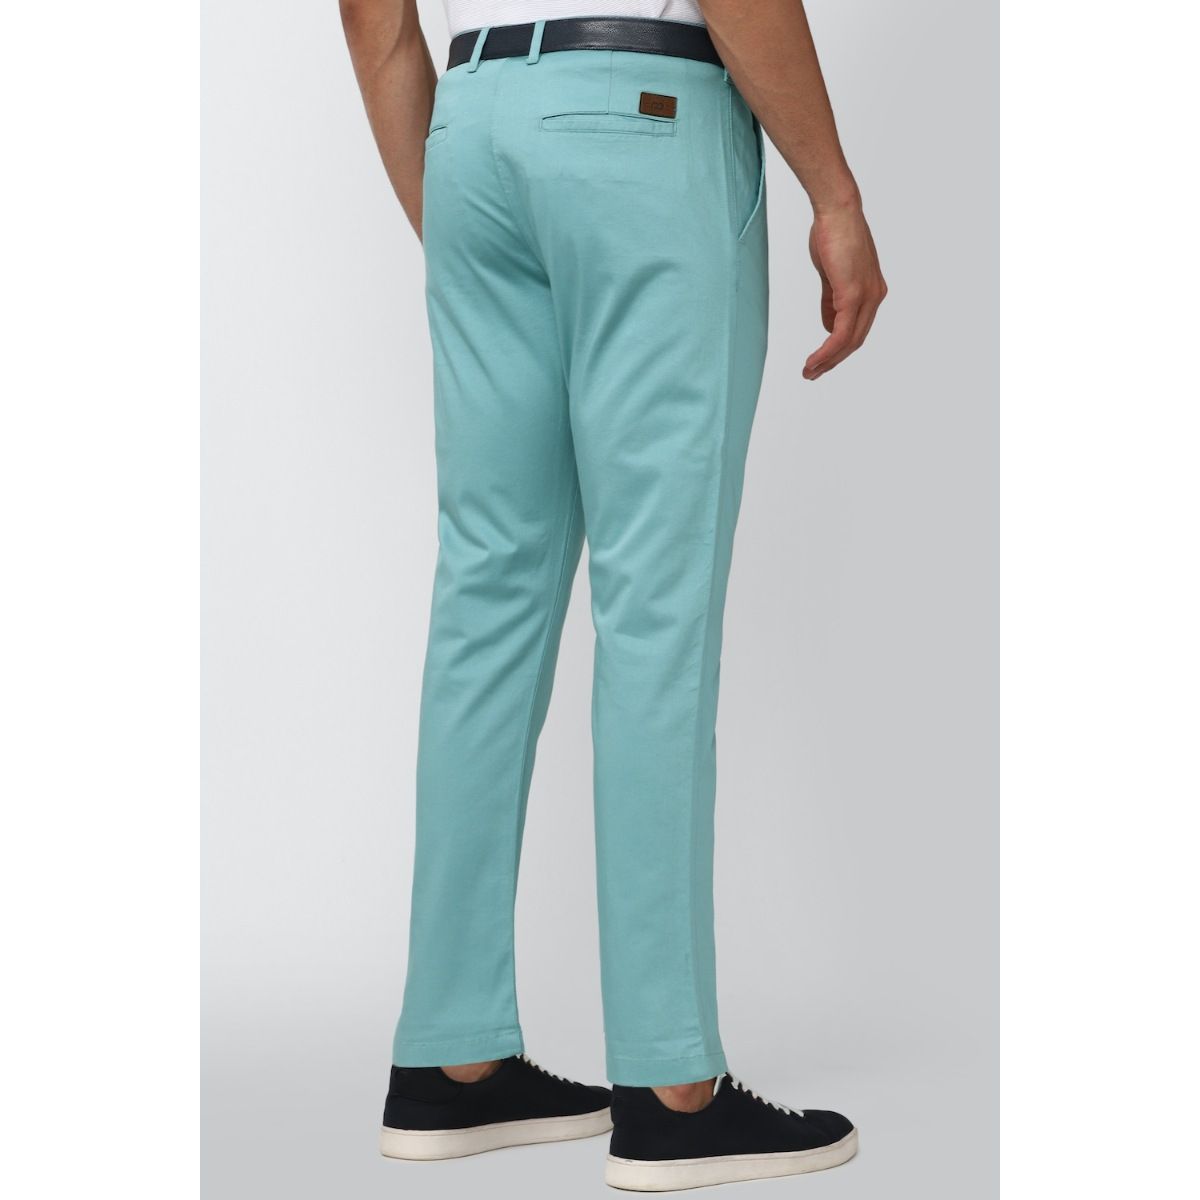 PETER ENGLAND Skinny Fit Men Green Trousers  Buy PETER ENGLAND Skinny Fit  Men Green Trousers Online at Best Prices in India  Flipkartcom